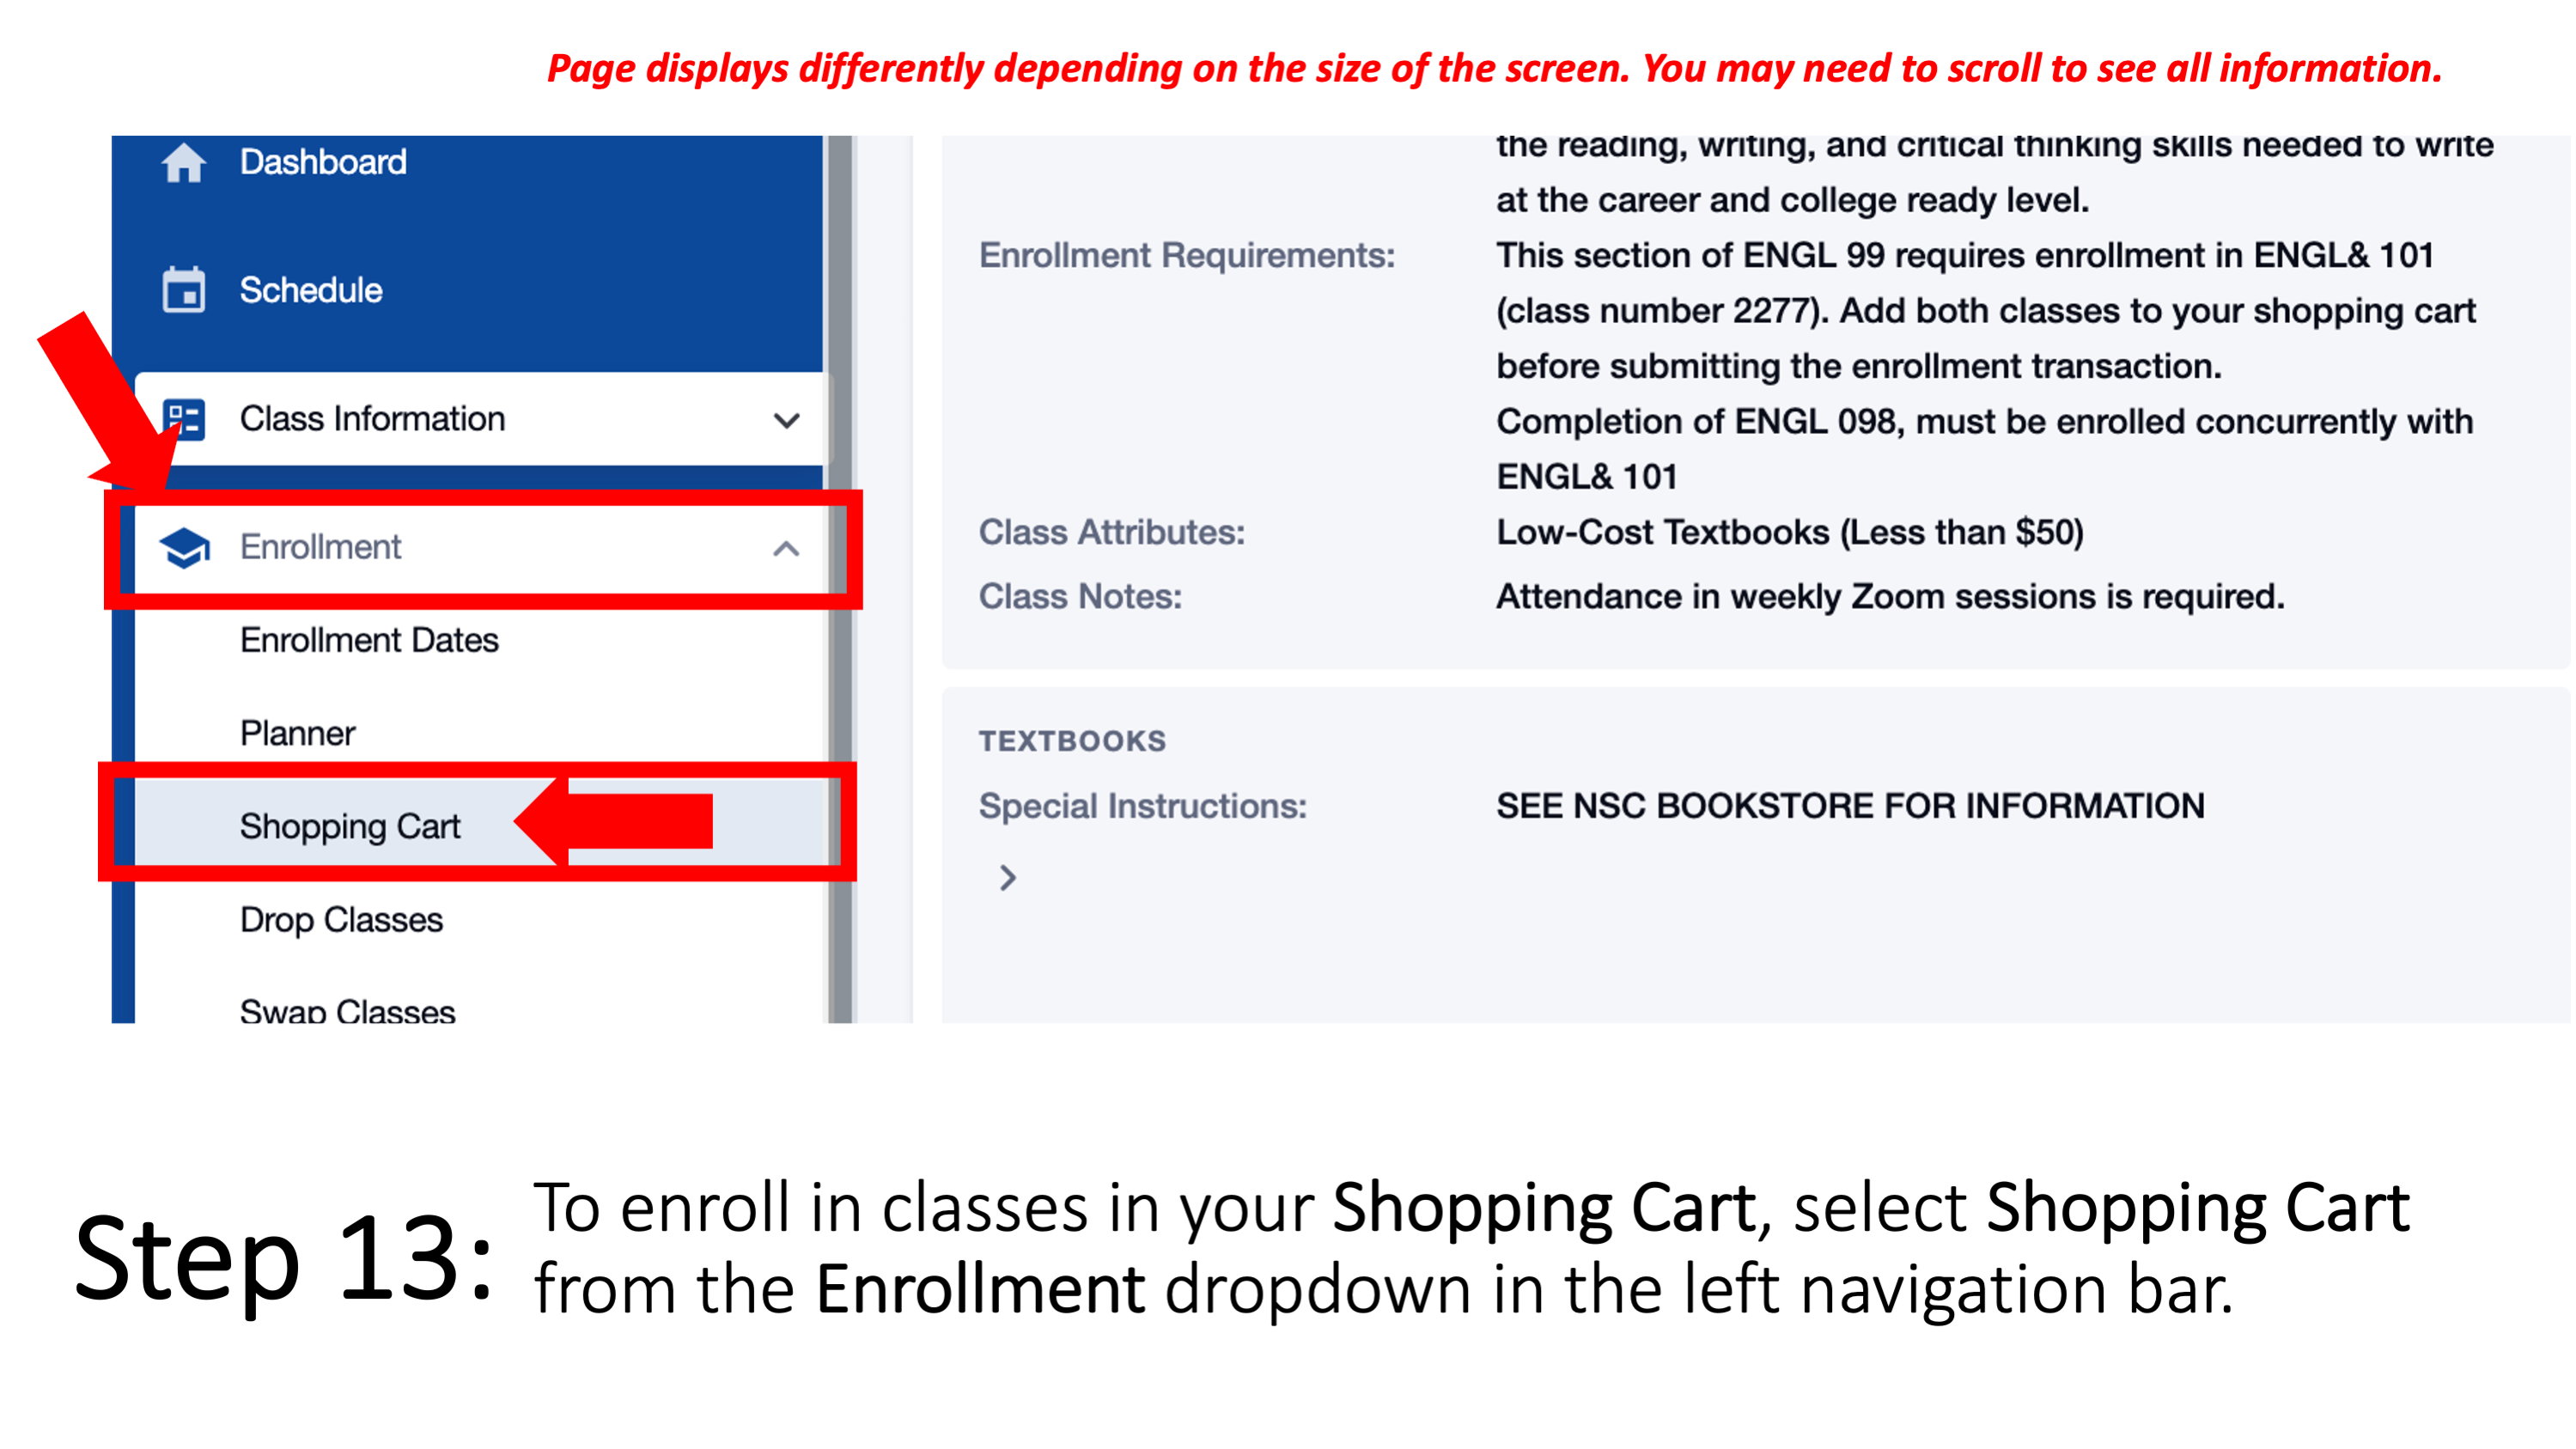 Step 13: To enroll in classes in your Shopping Cart, select Shopping Cart from the Enrollment dropdown in the left navigation bar. Page displays differently depending on the size of the screen. You may need to scroll to see all information.